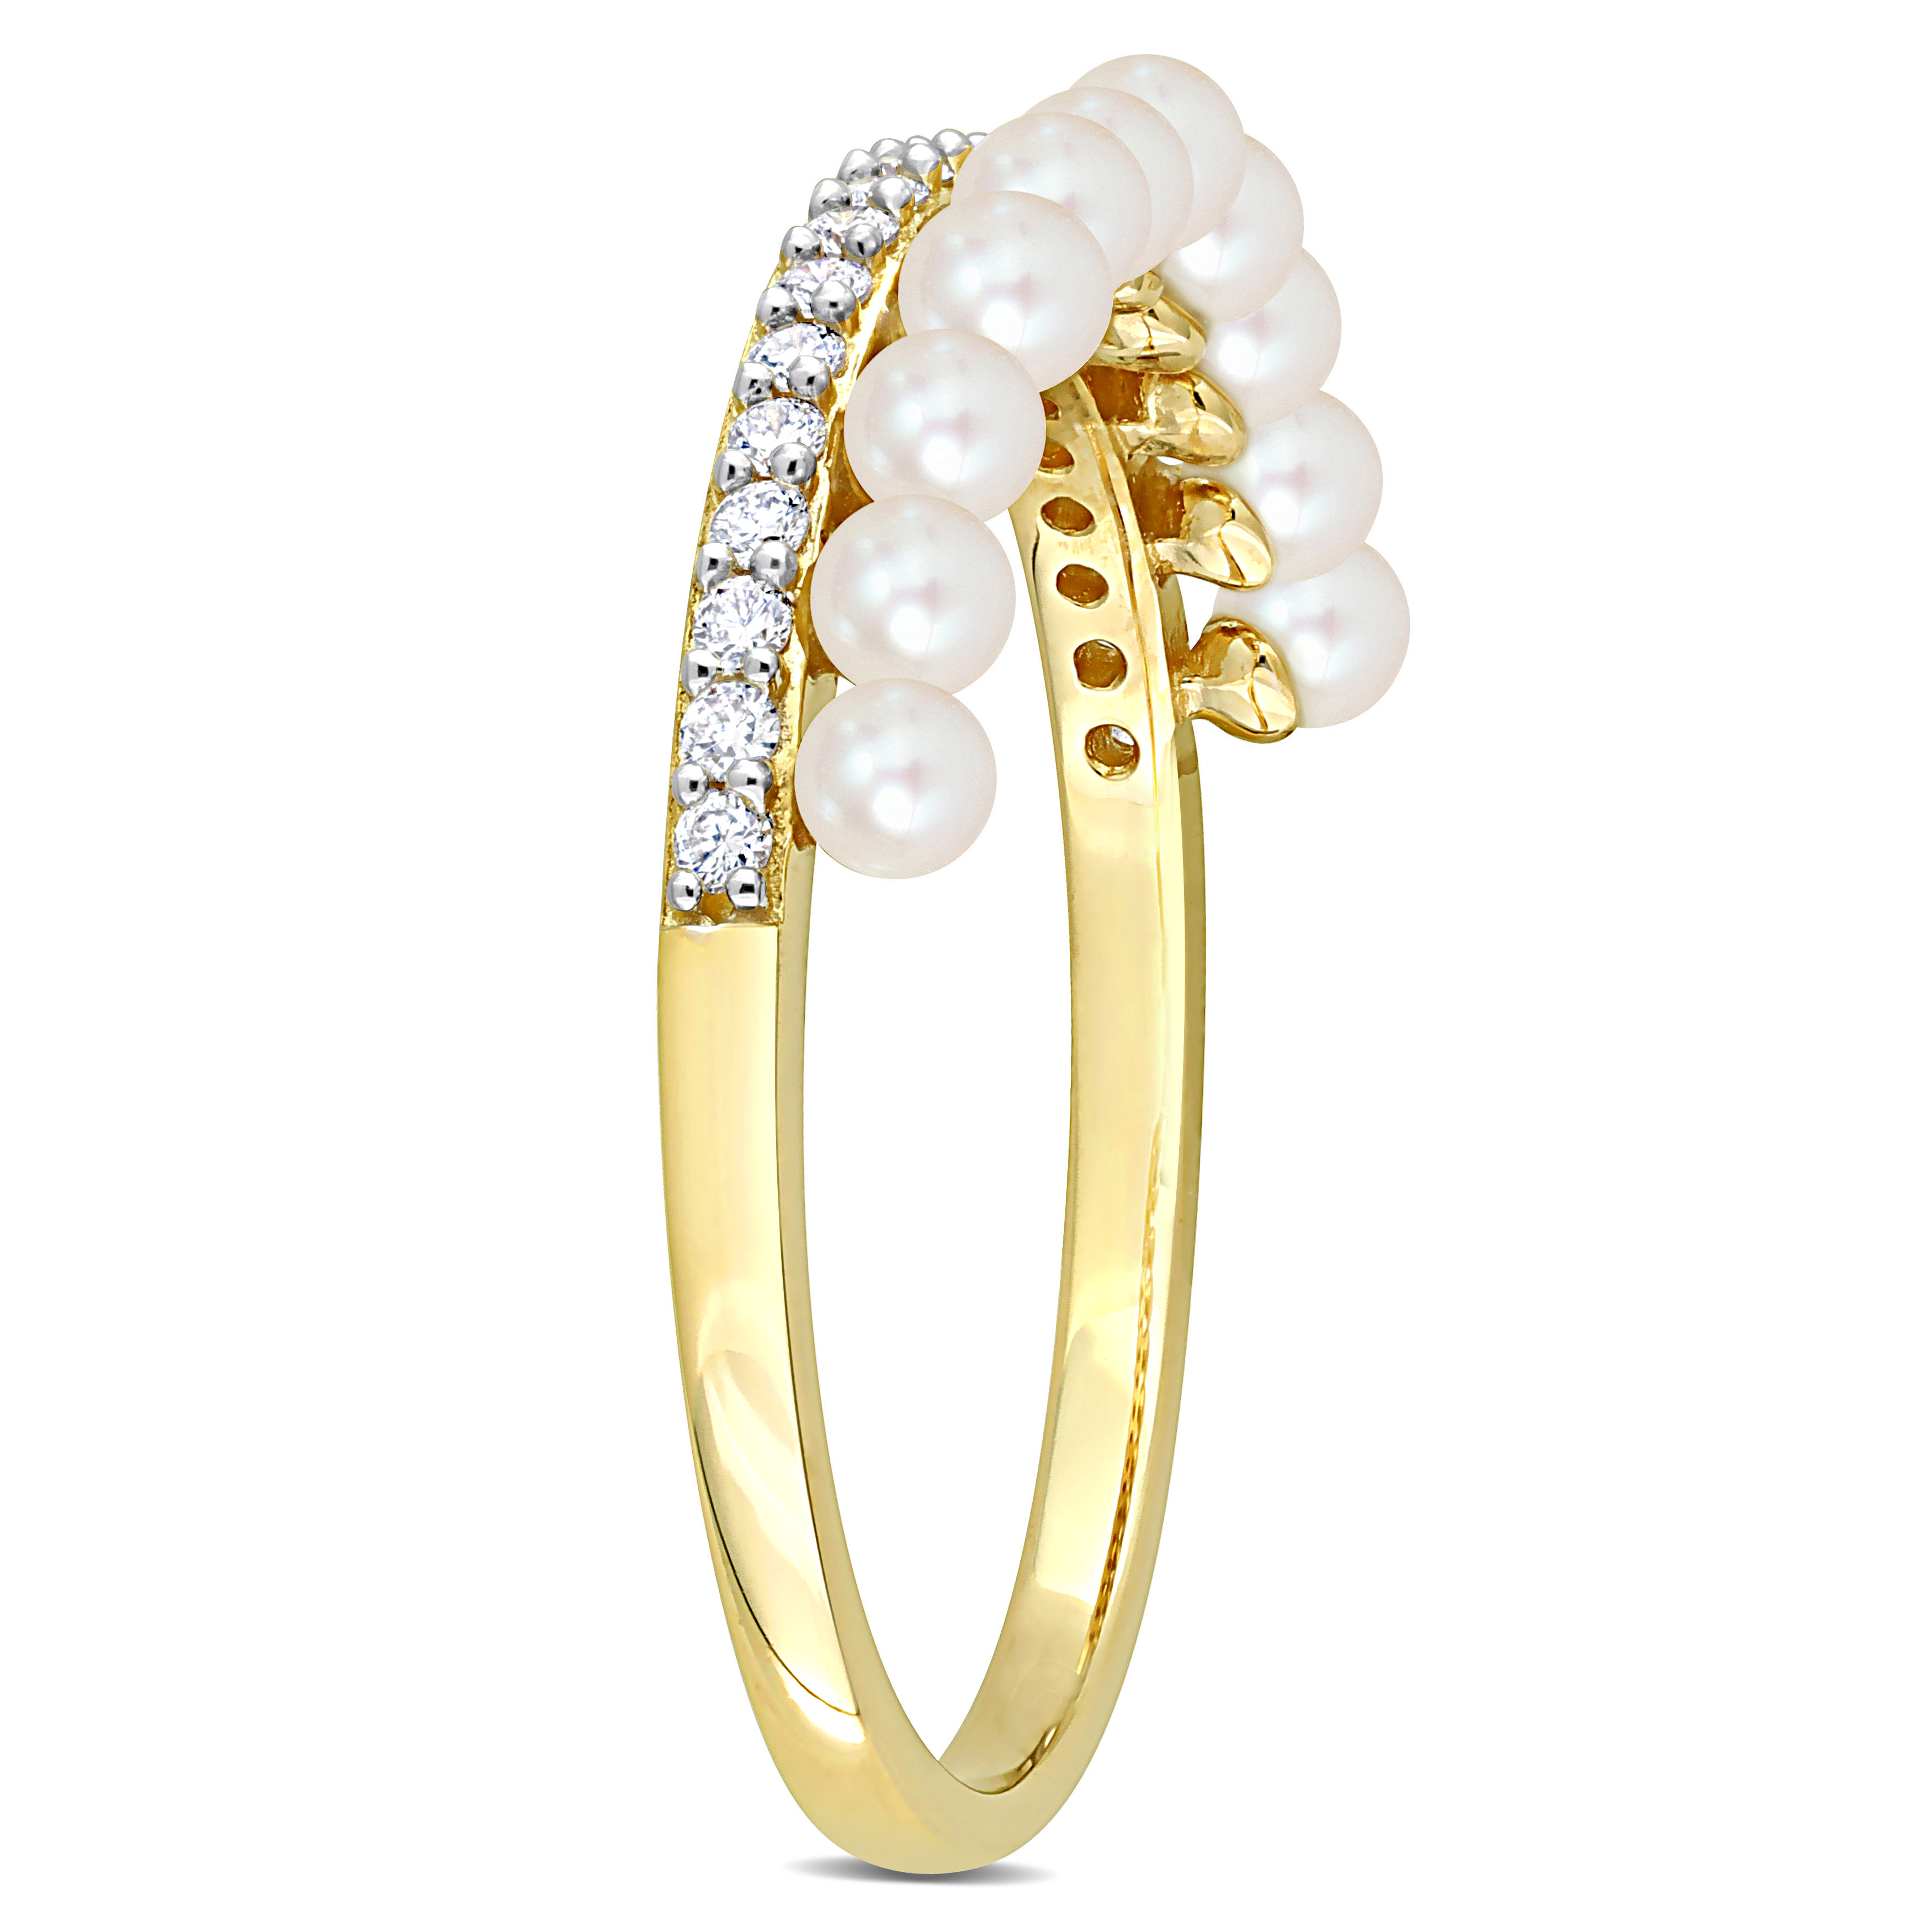 2-2.5 MM Freshwater Cultured Pearl and 1/6ct TDW Diamond Single Row Ring in 14k Yellow Gold